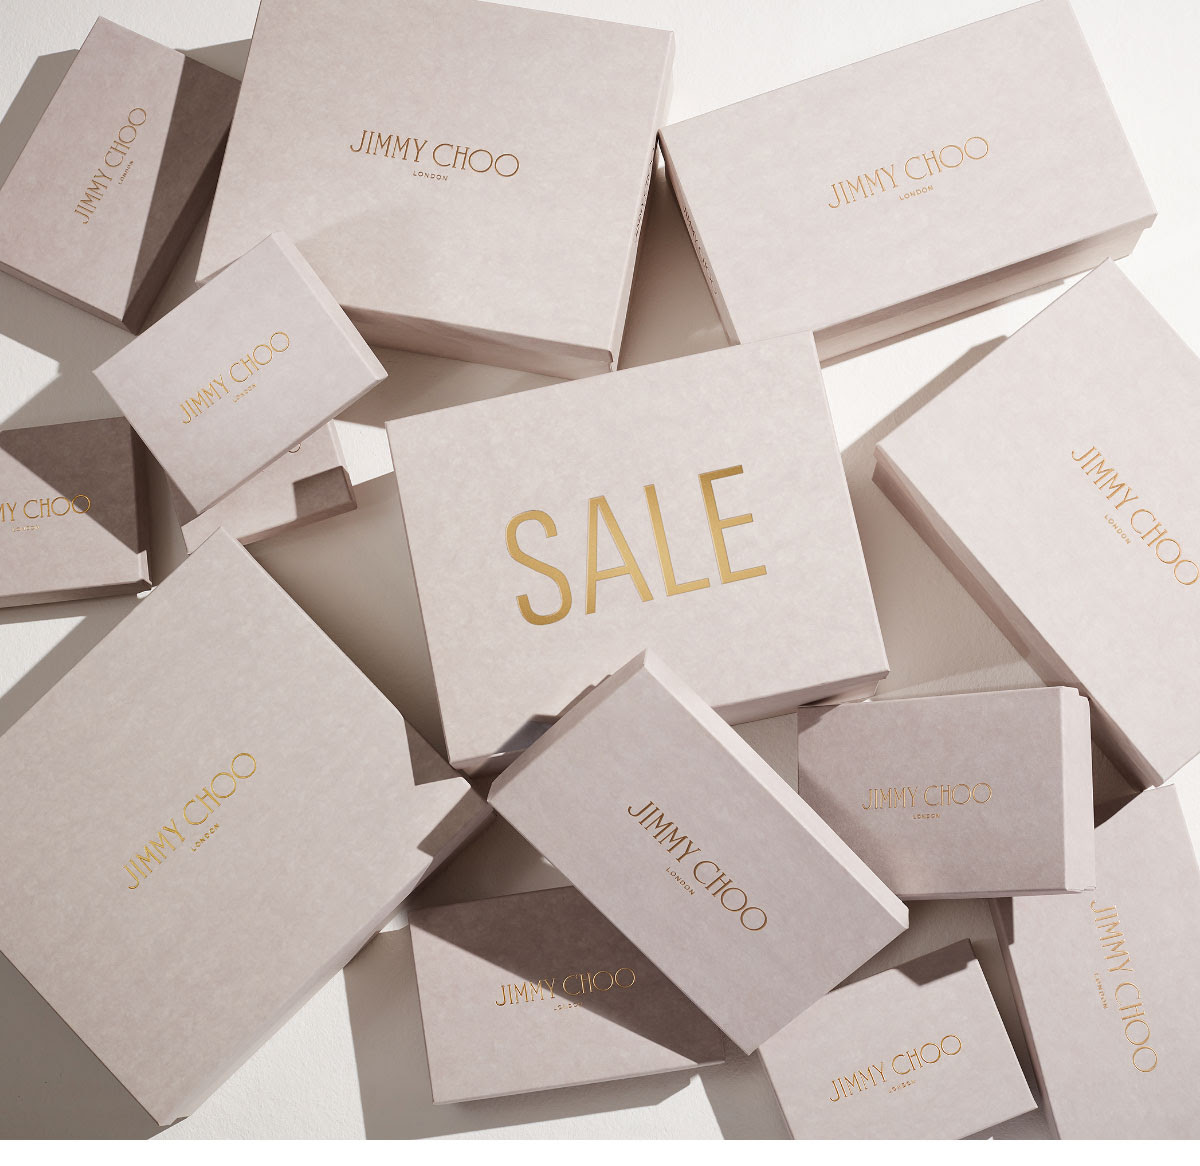 Jimmy Choo - Sale - Shop Your Size At Up To 50% Off